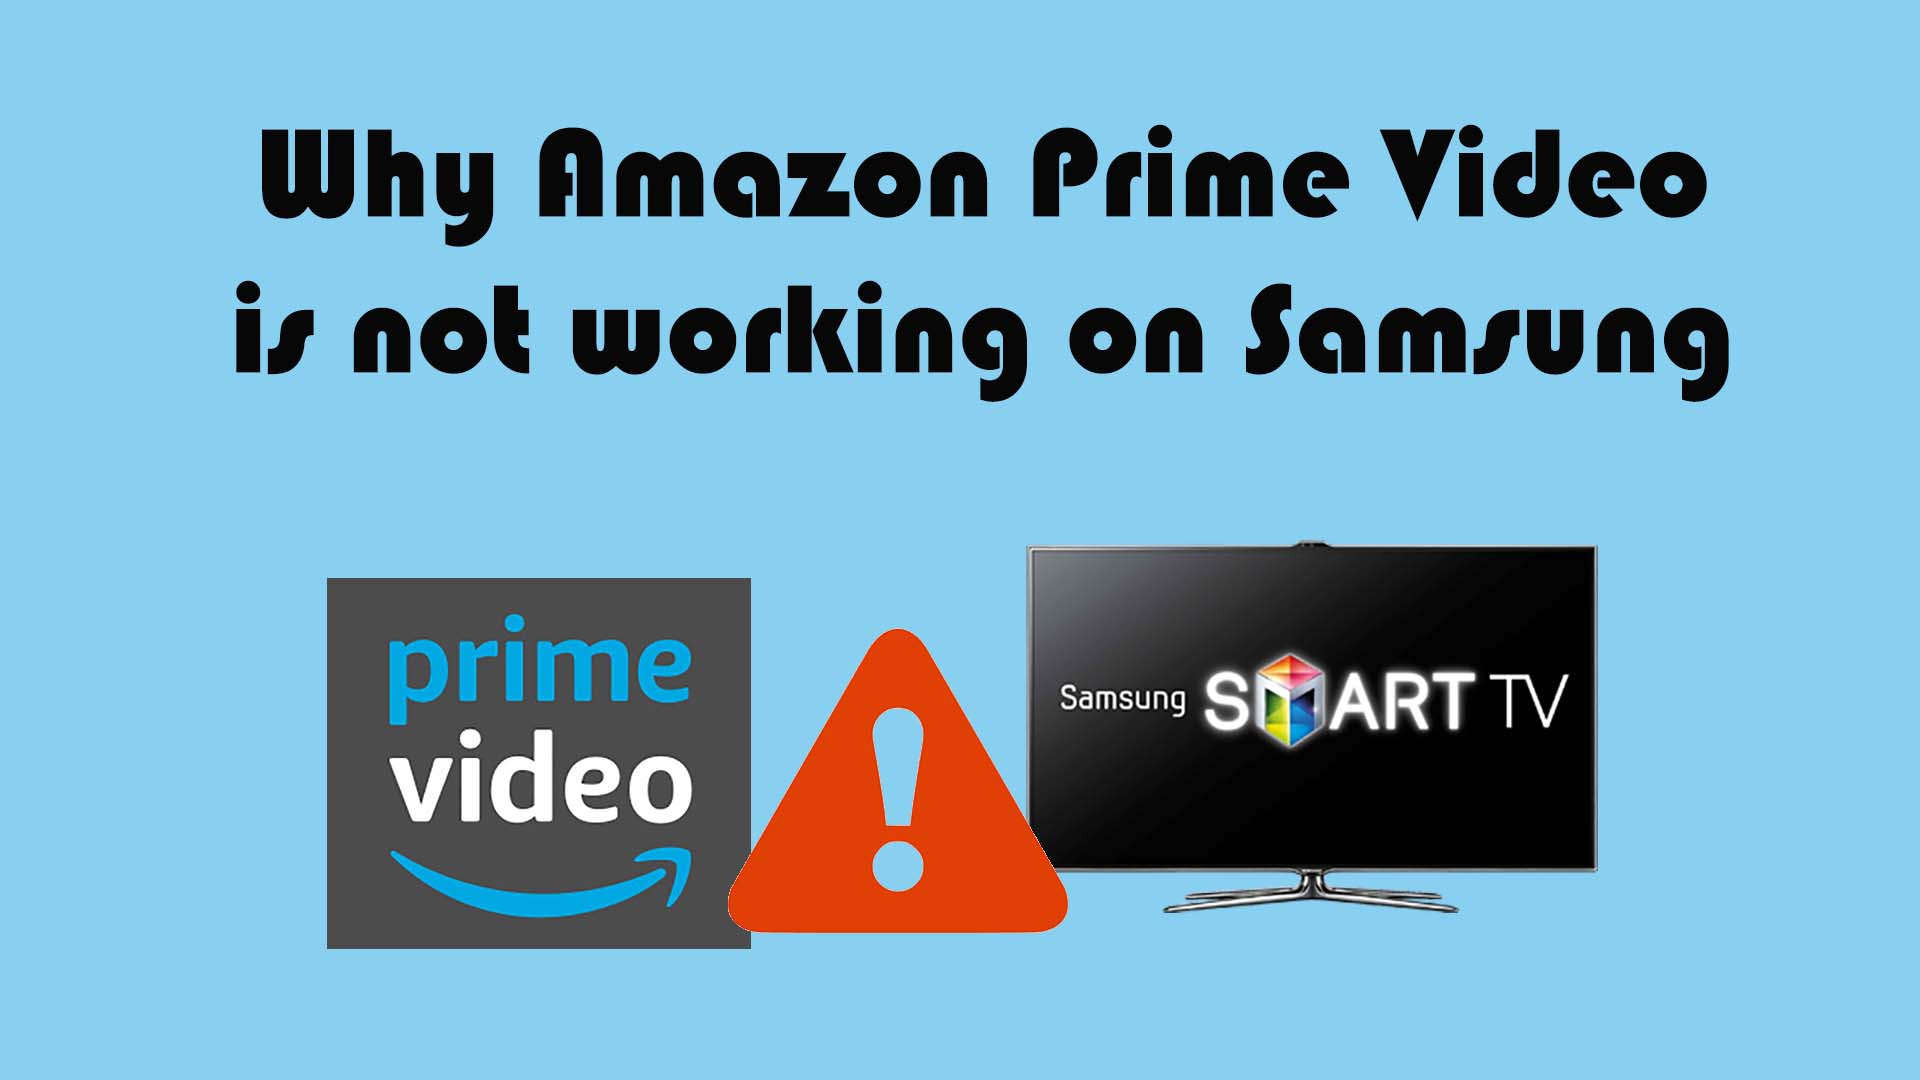 Reasons & Fixes for Amazon Prime Video Not Working on Samsung TV